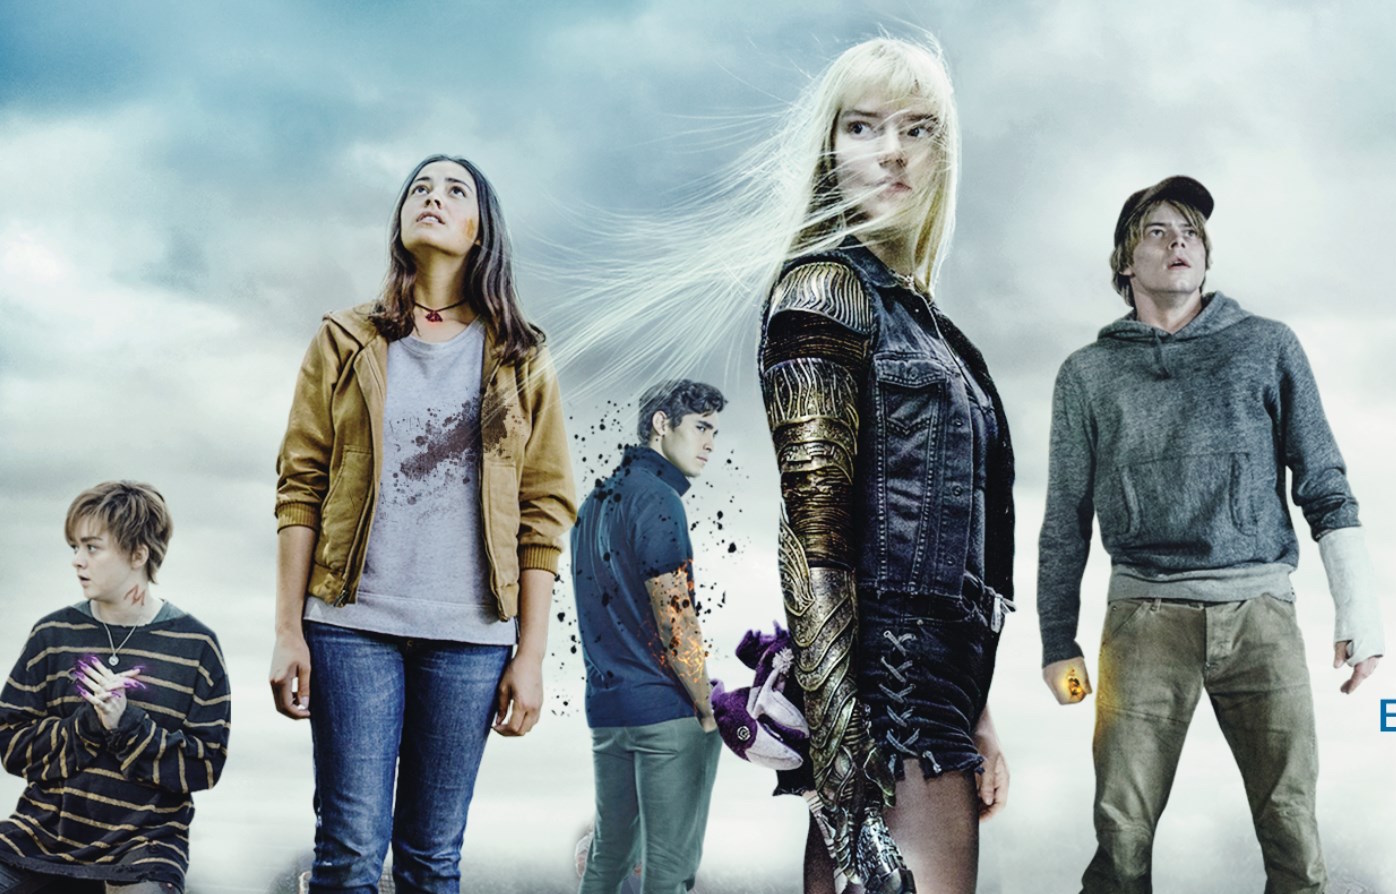 The New Mutants' Gets Trailer for April Release - Horror News Network